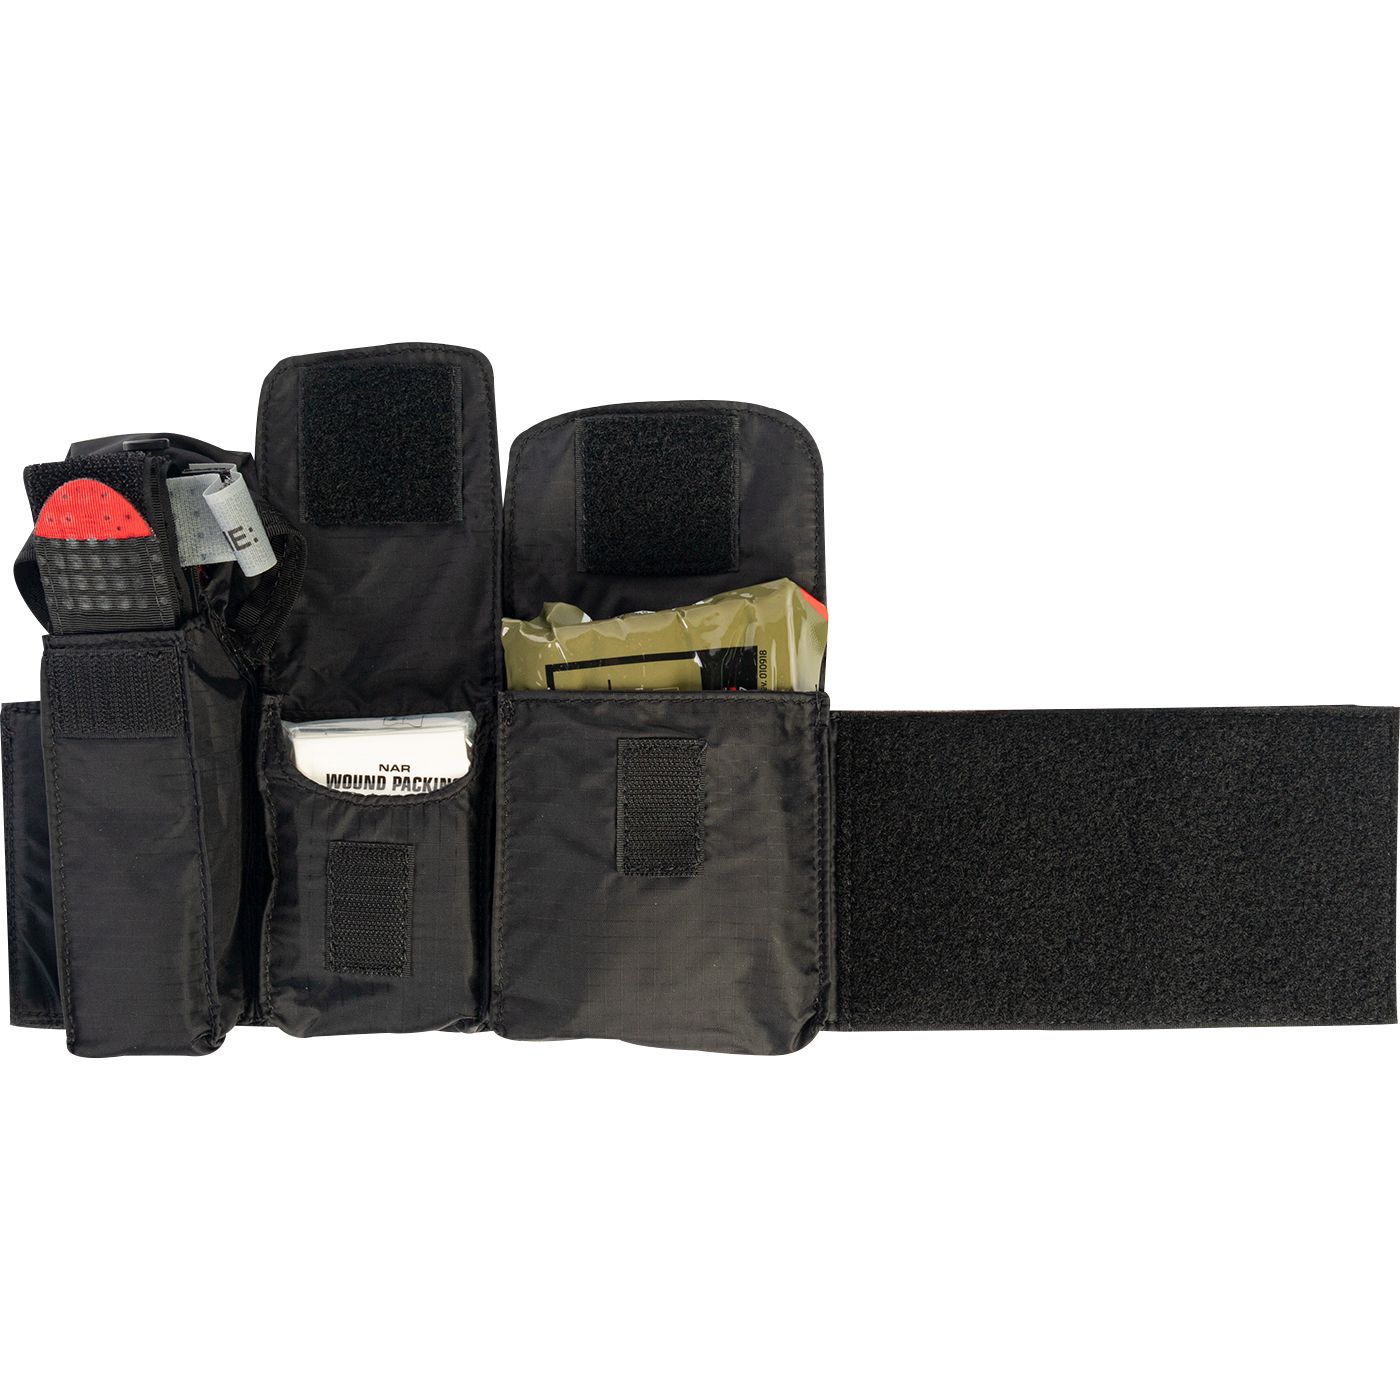 Ankle Trauma Holster and Kits (North American Rescue)